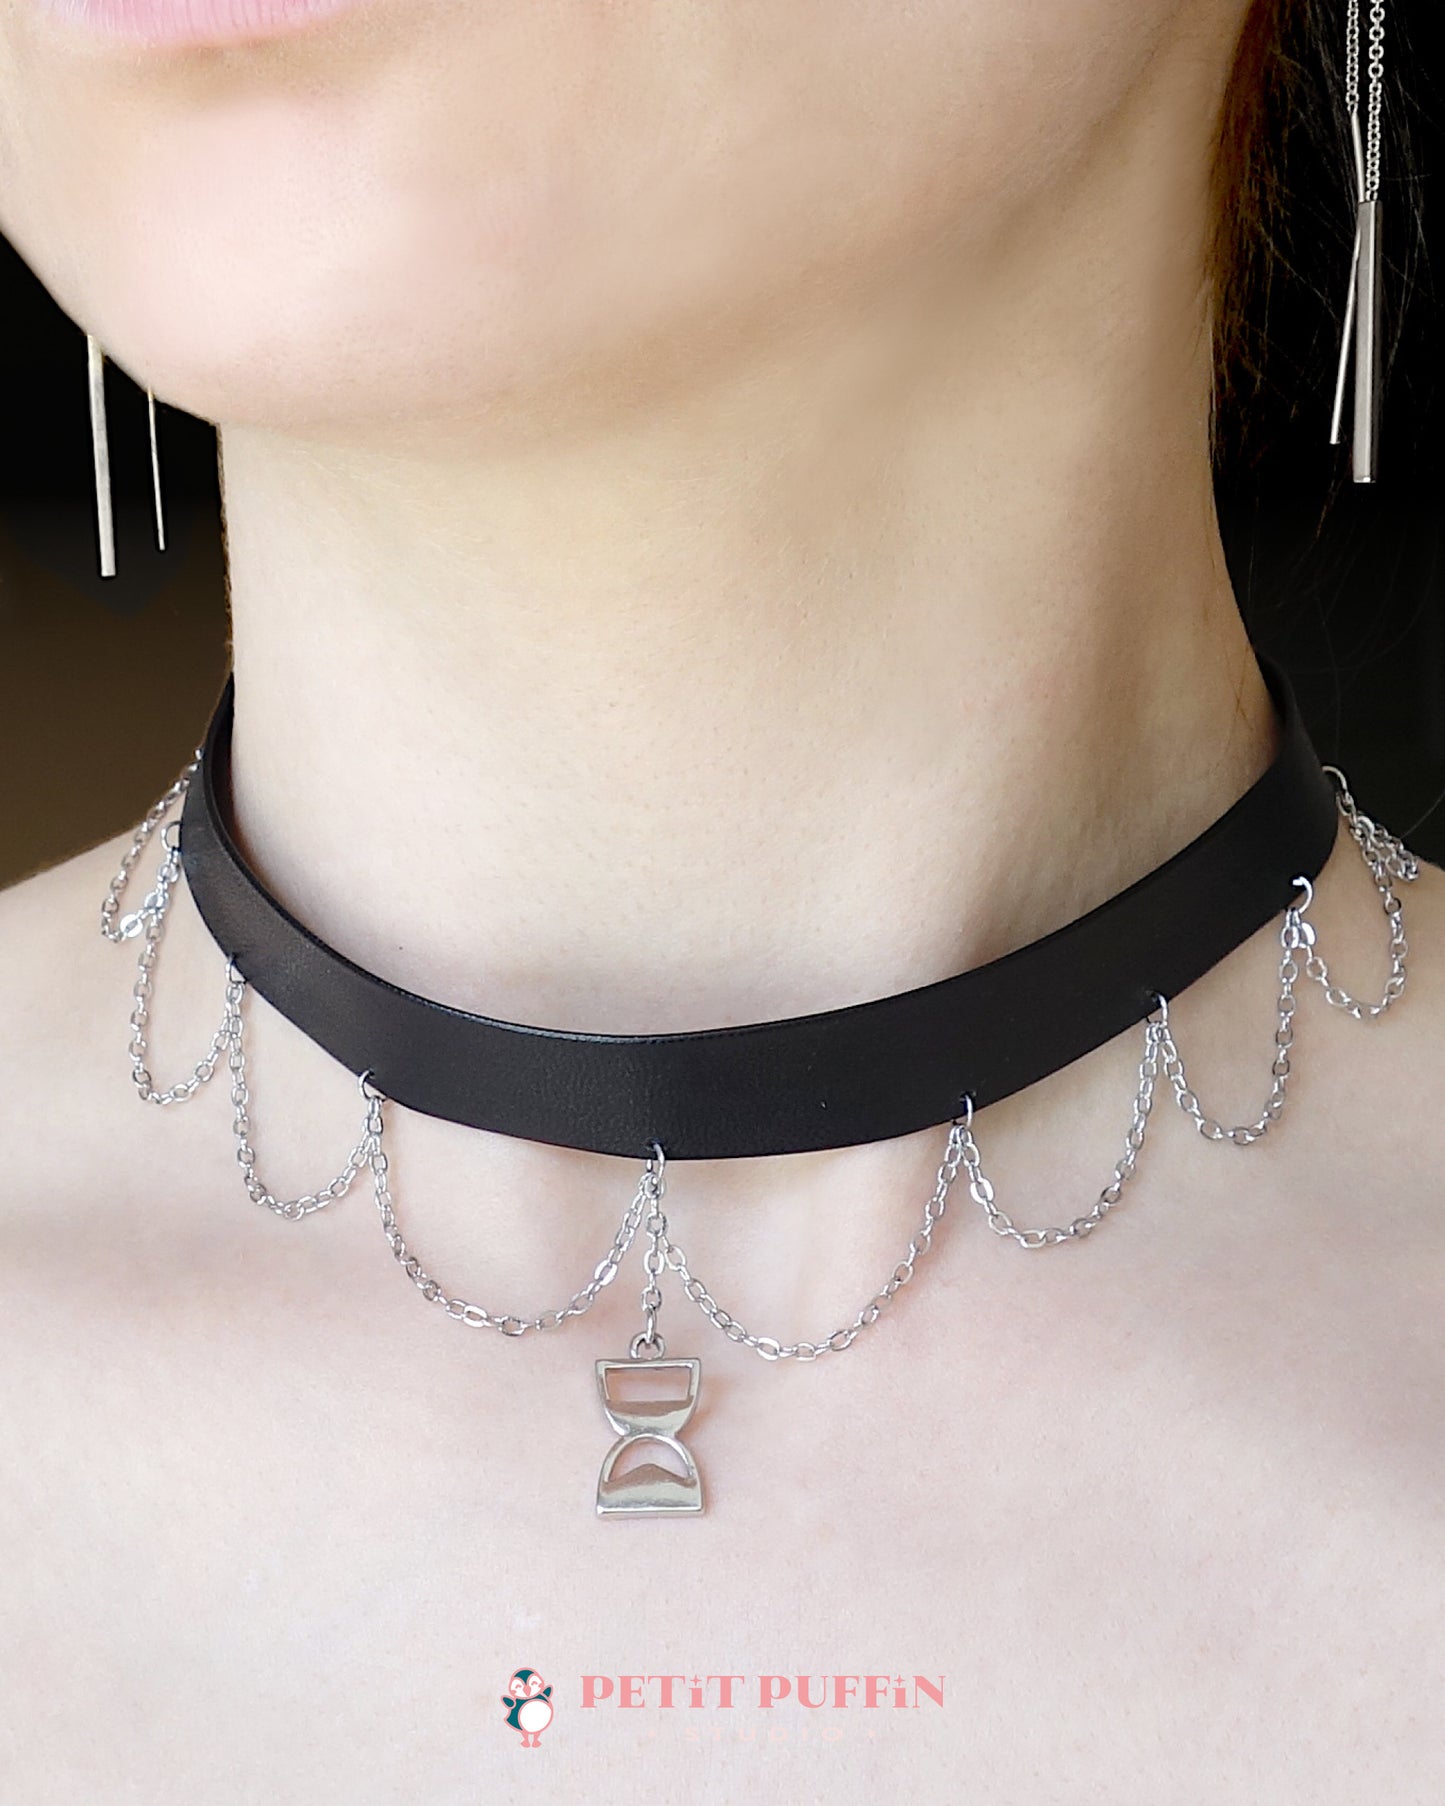 The Long Journey - "hourglass" choker necklace